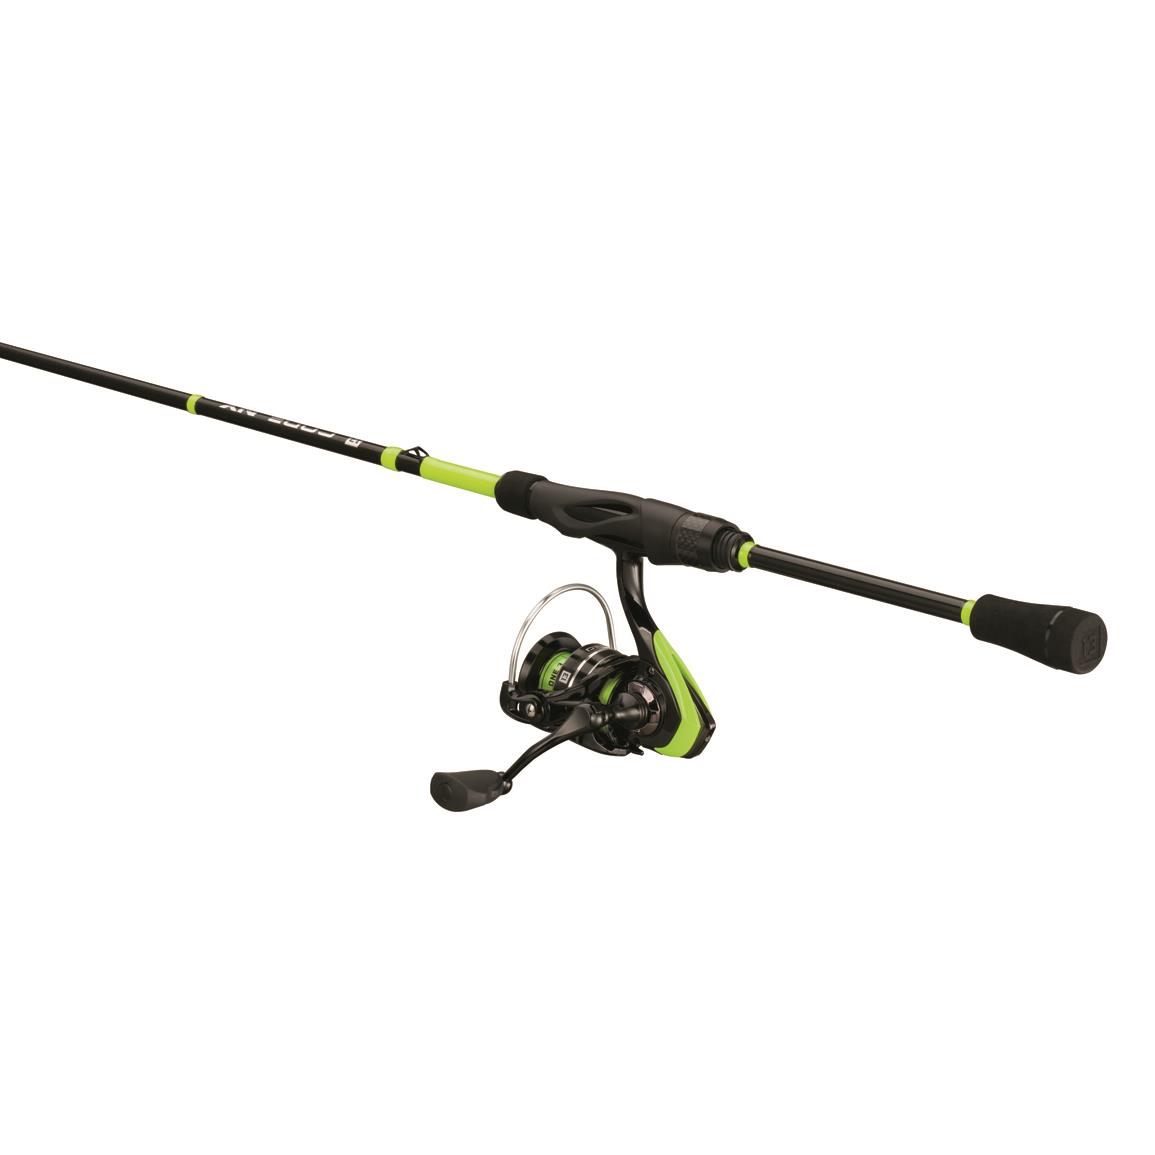 13 Fishing Intent GTS Spinning Combo, 6'10 Length, Medium Light Power, 2000  Reel Size - 729834, Spinning Combos at Sportsman's Guide